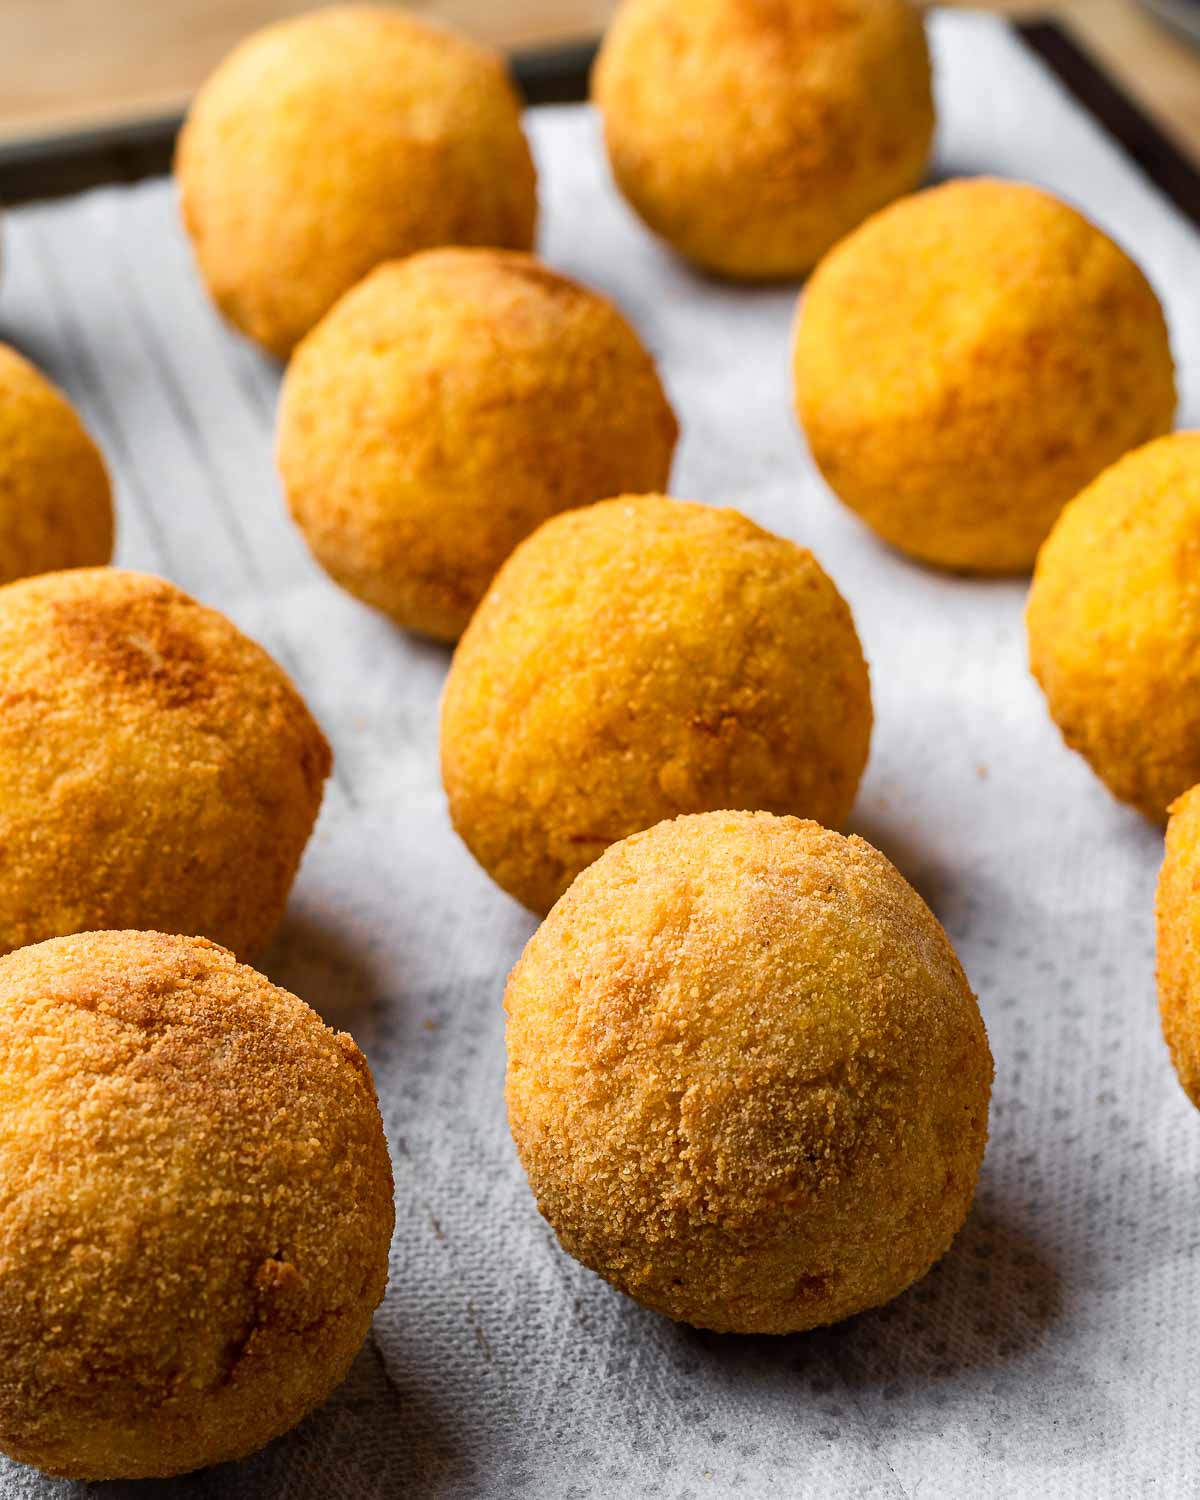 Pic of a bunch of fried arancini on white paper towels.